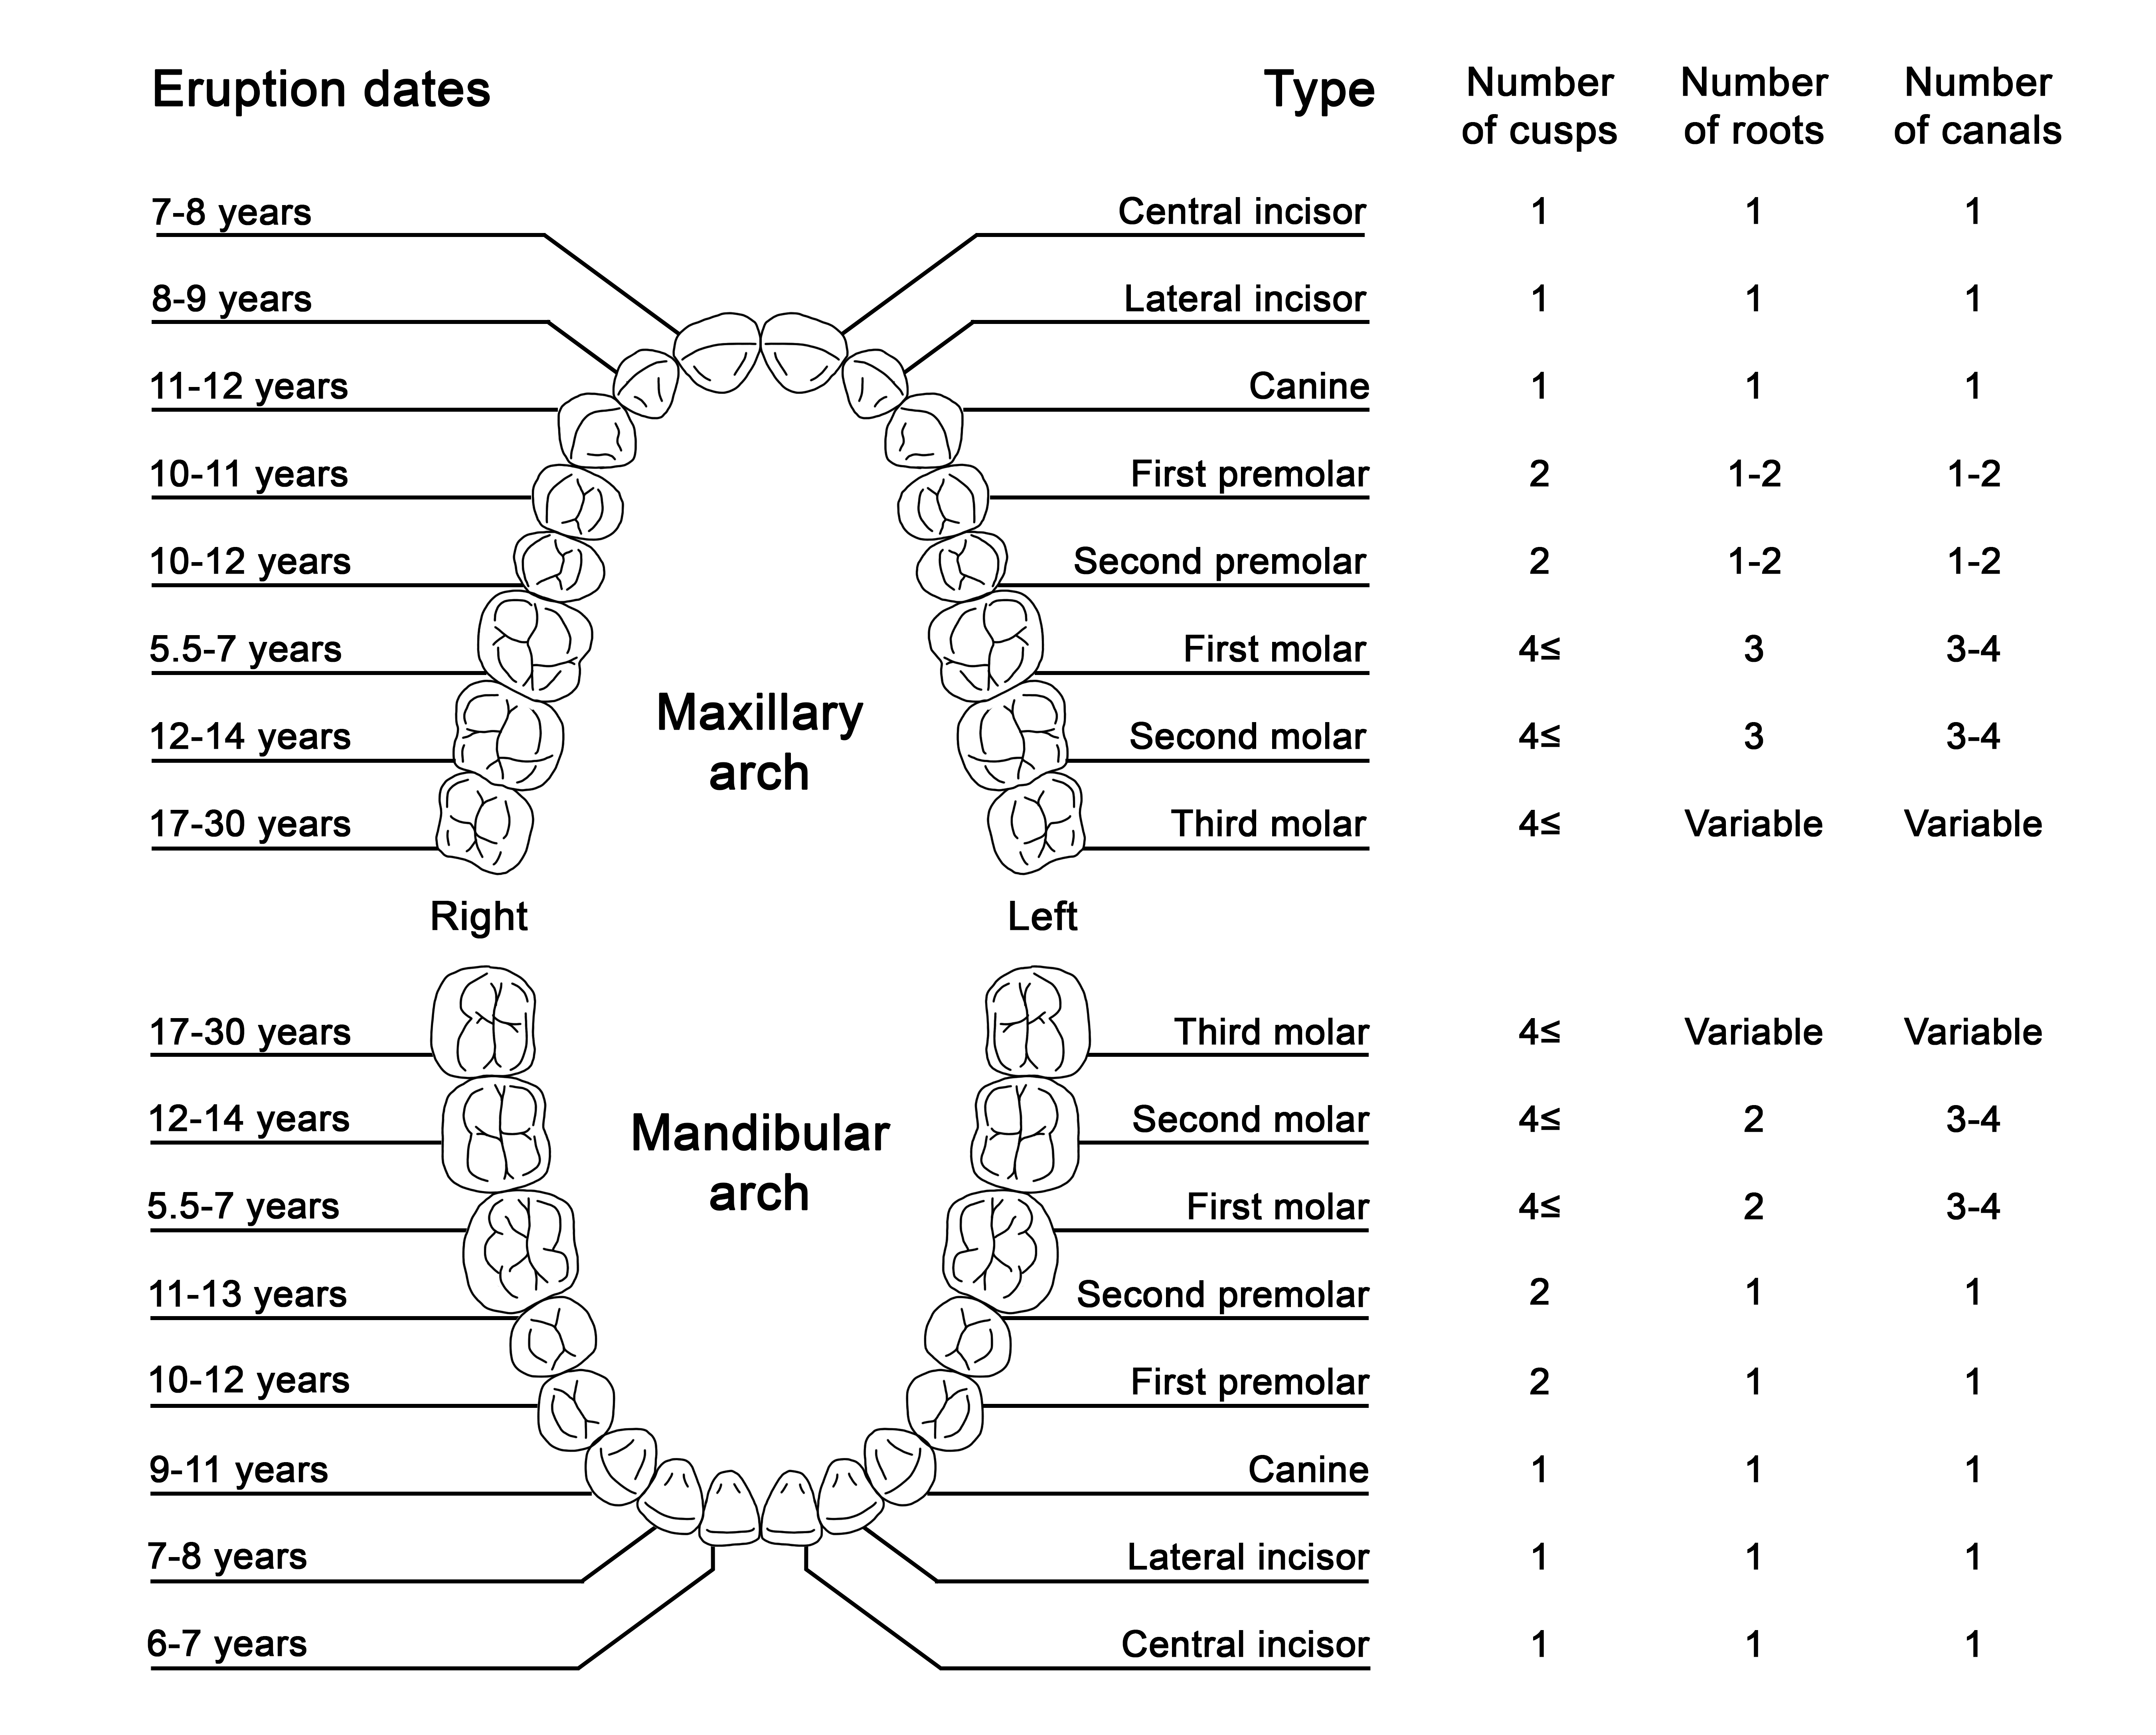 The permanent dentition - eruption dates and tooth morphology